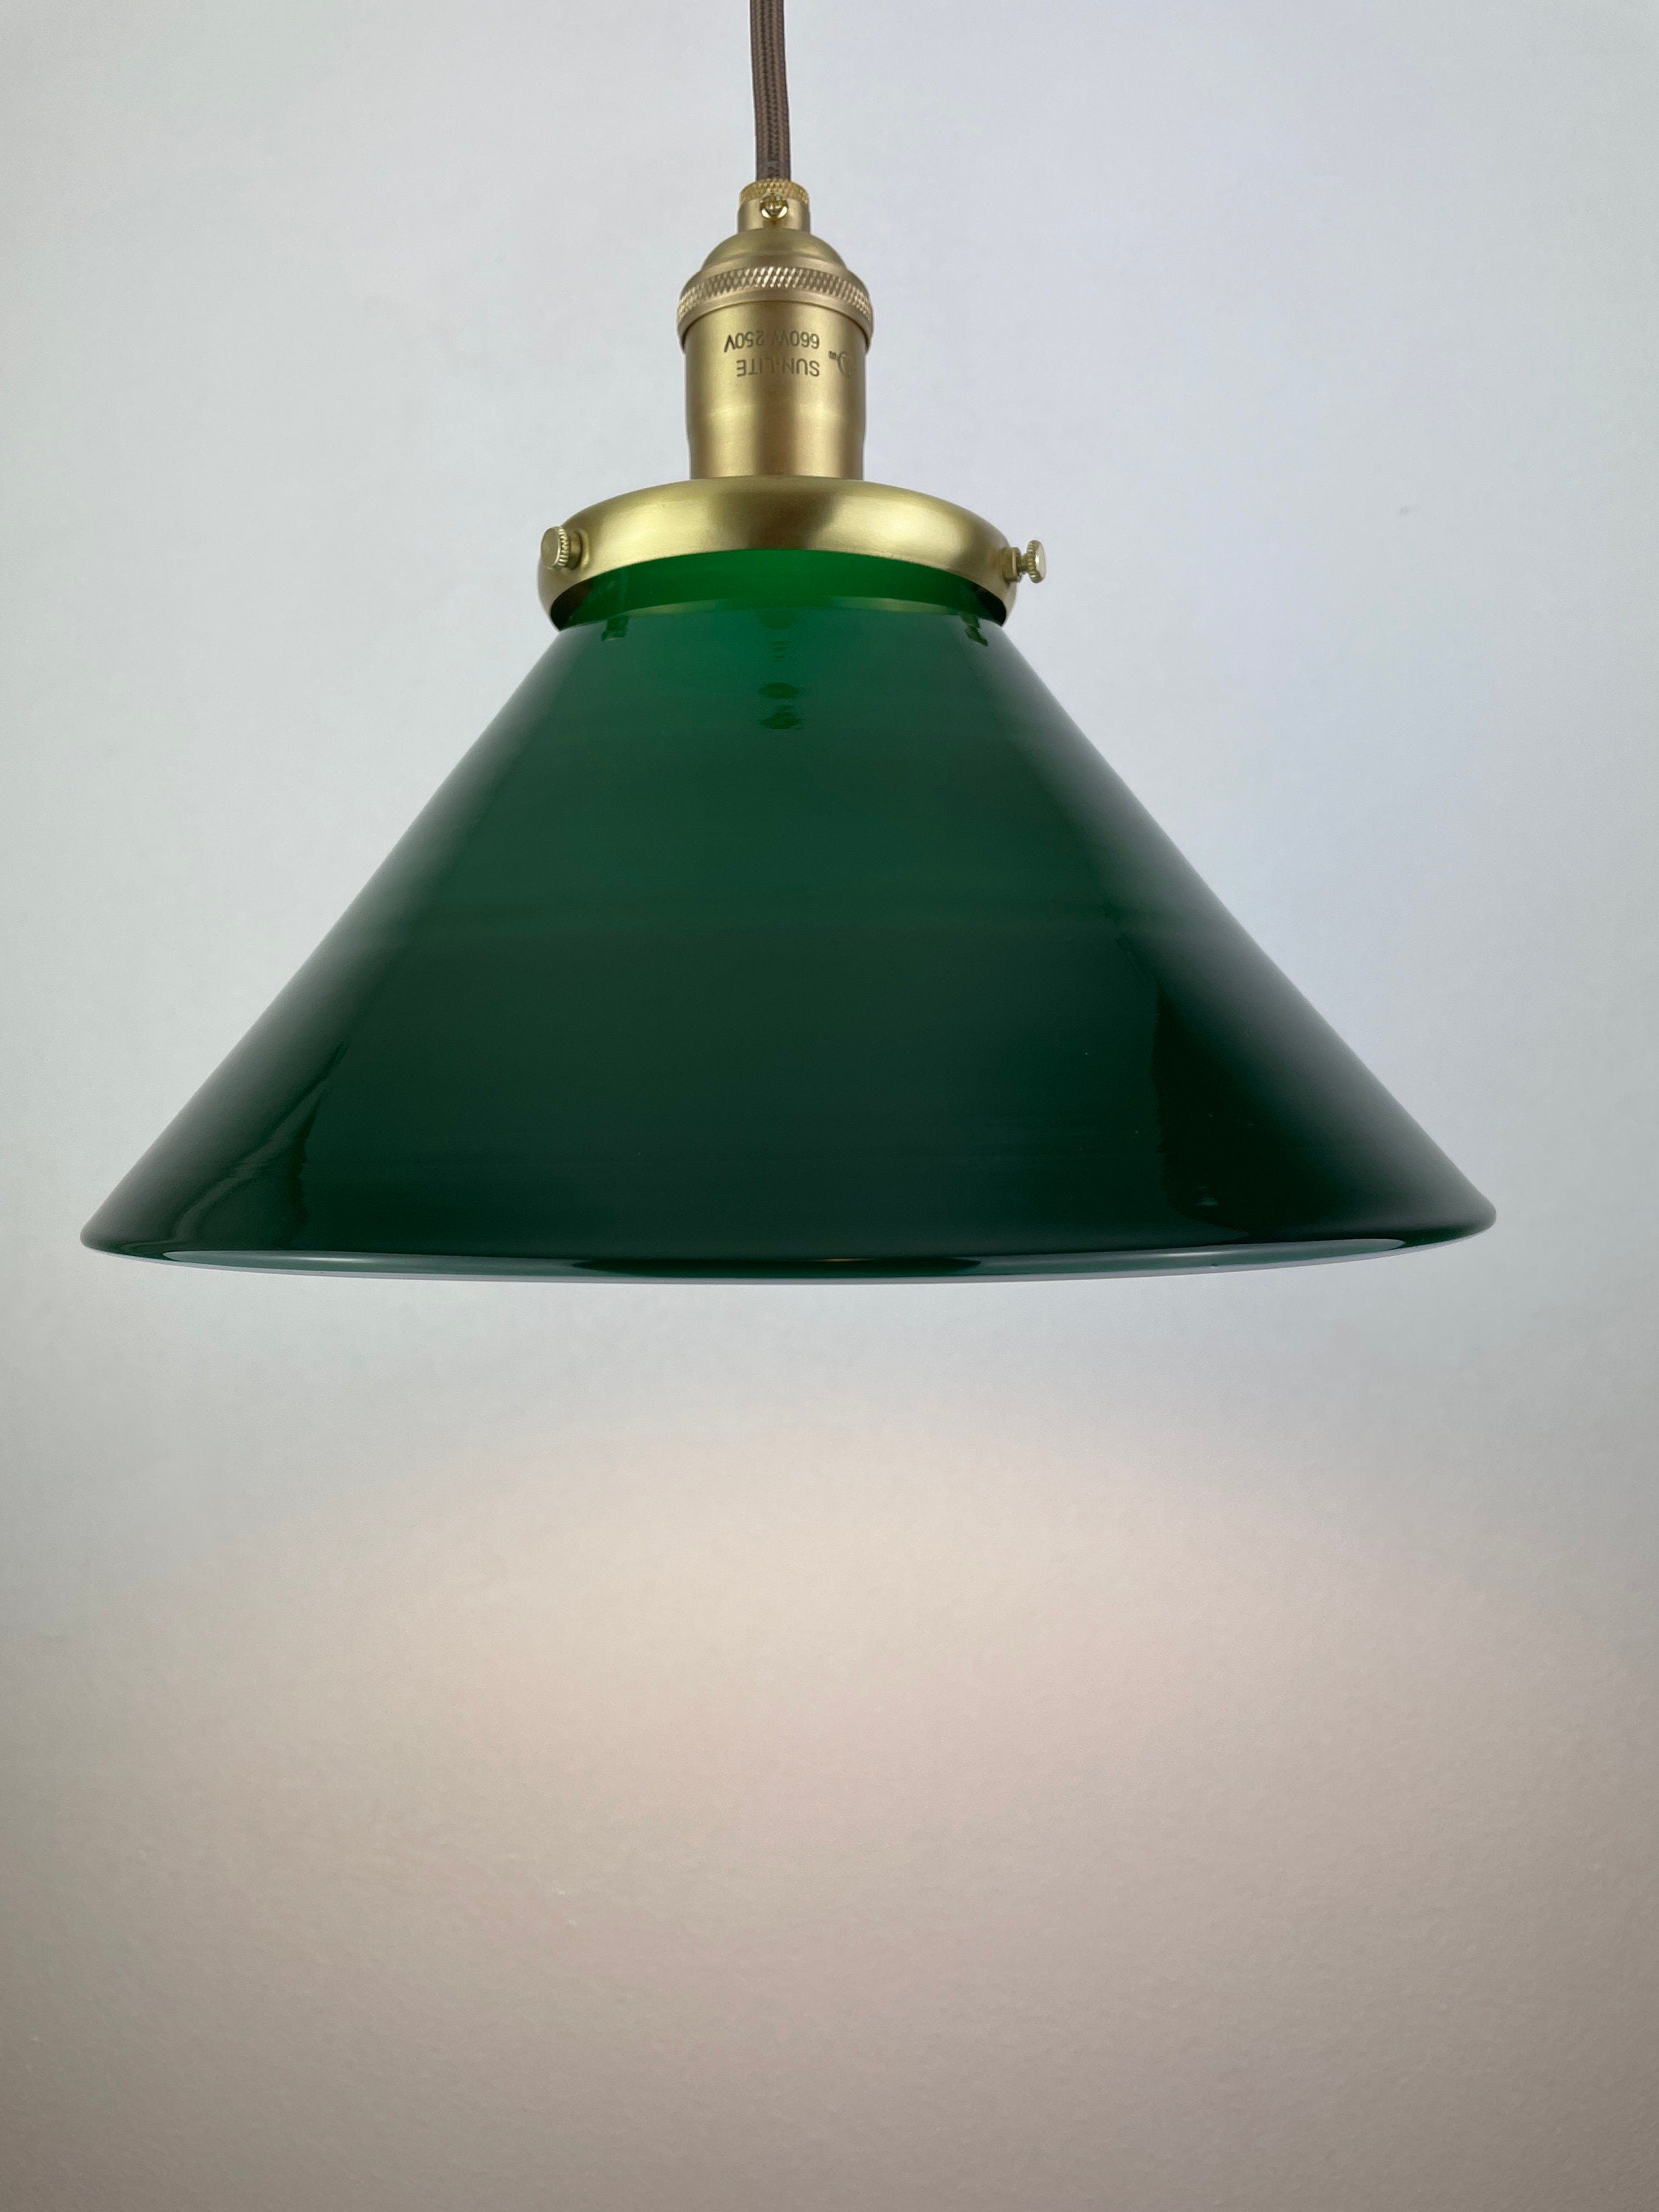 Beautiful vintage dark Emerald Green Glass Shade with interior white casing now a beautiful pendant light with custom Satin Brass hardware